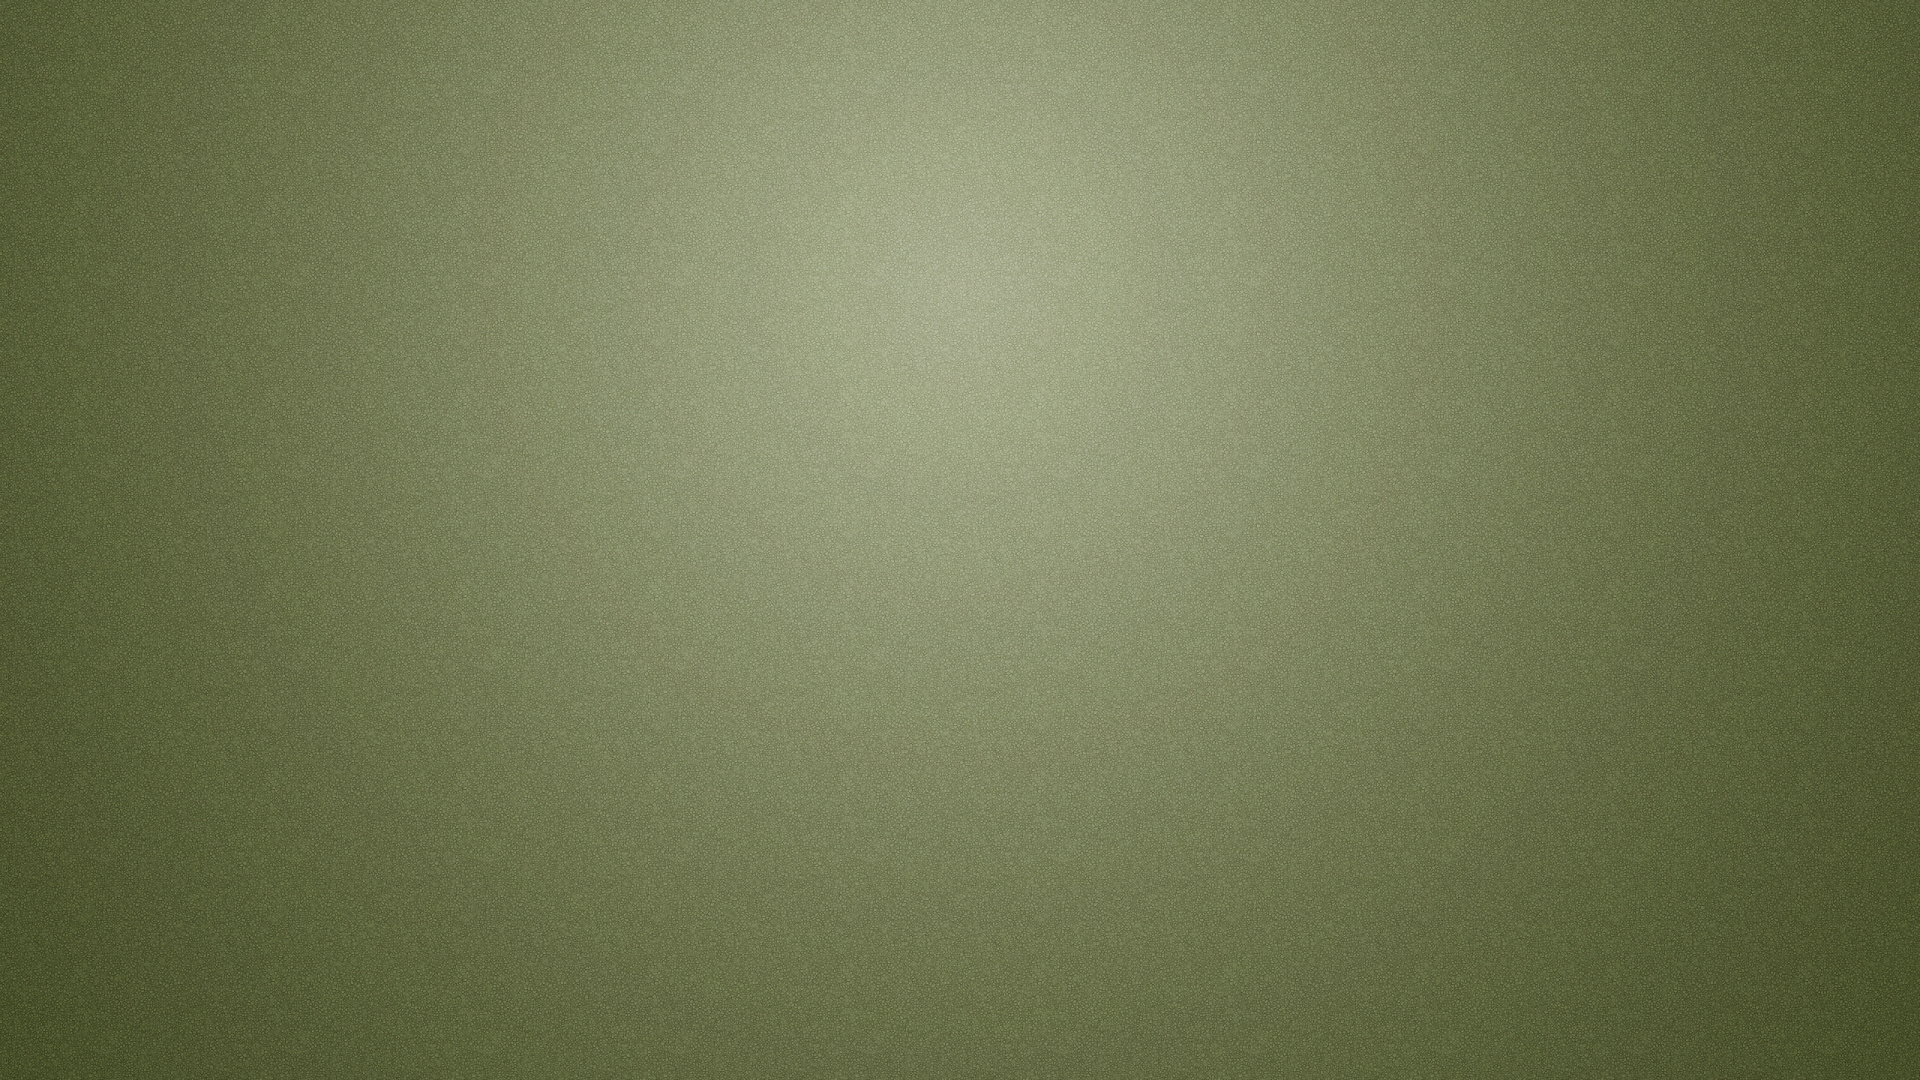 Green Wall With Light Bulb. Wallpaper in 1920x1080 Resolution